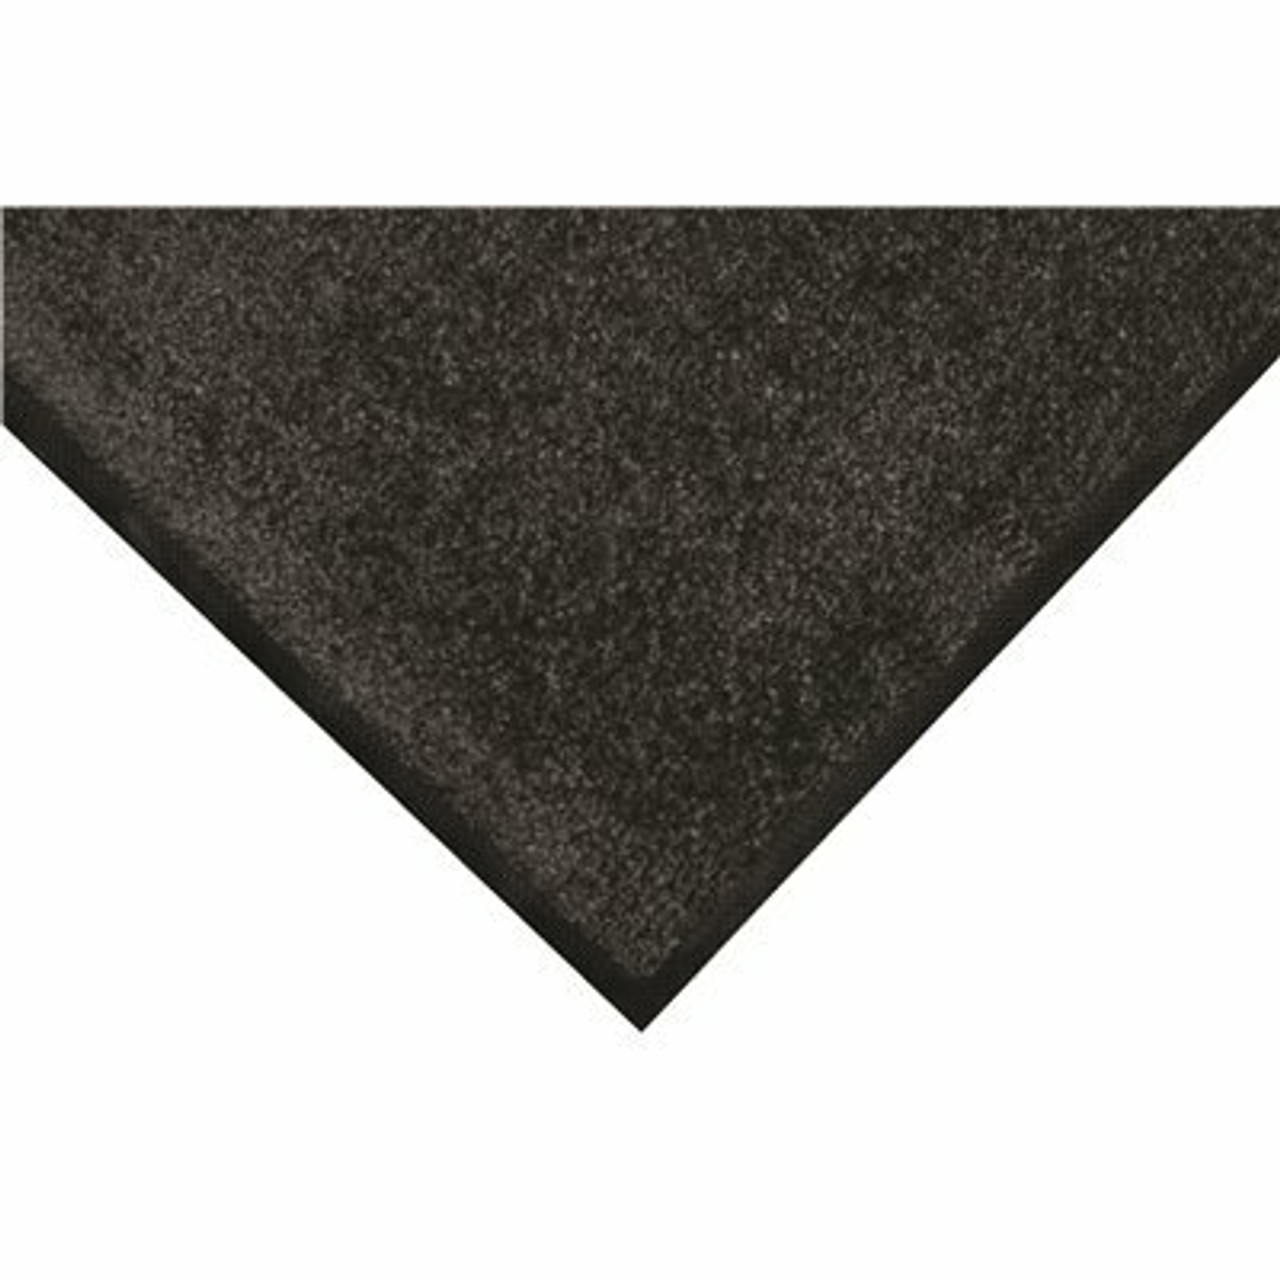 M+A Matting Colorstar Mat Cabot Grey 59 In. X 35 In. Pet Carpet Universal Cleated Backing Commercial Floor Mat